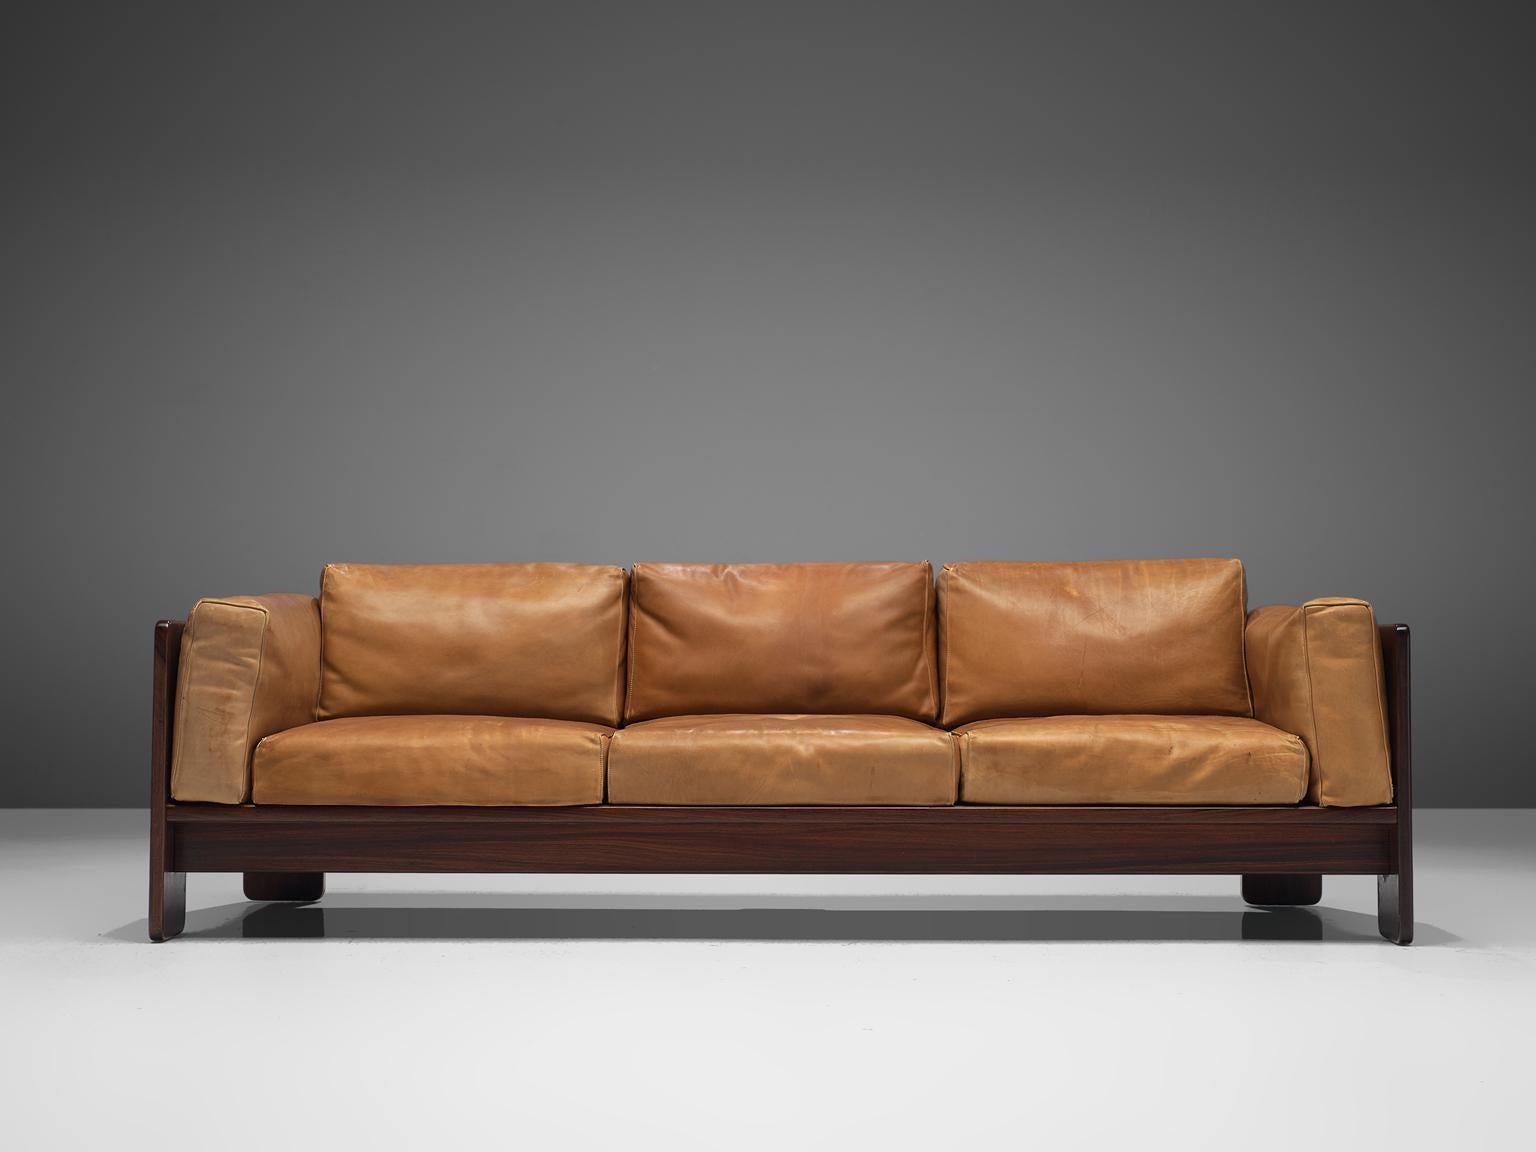 Tobia Scarpa 'Bastiano' Living Room Set in Rosewood and Cognac Leather 1